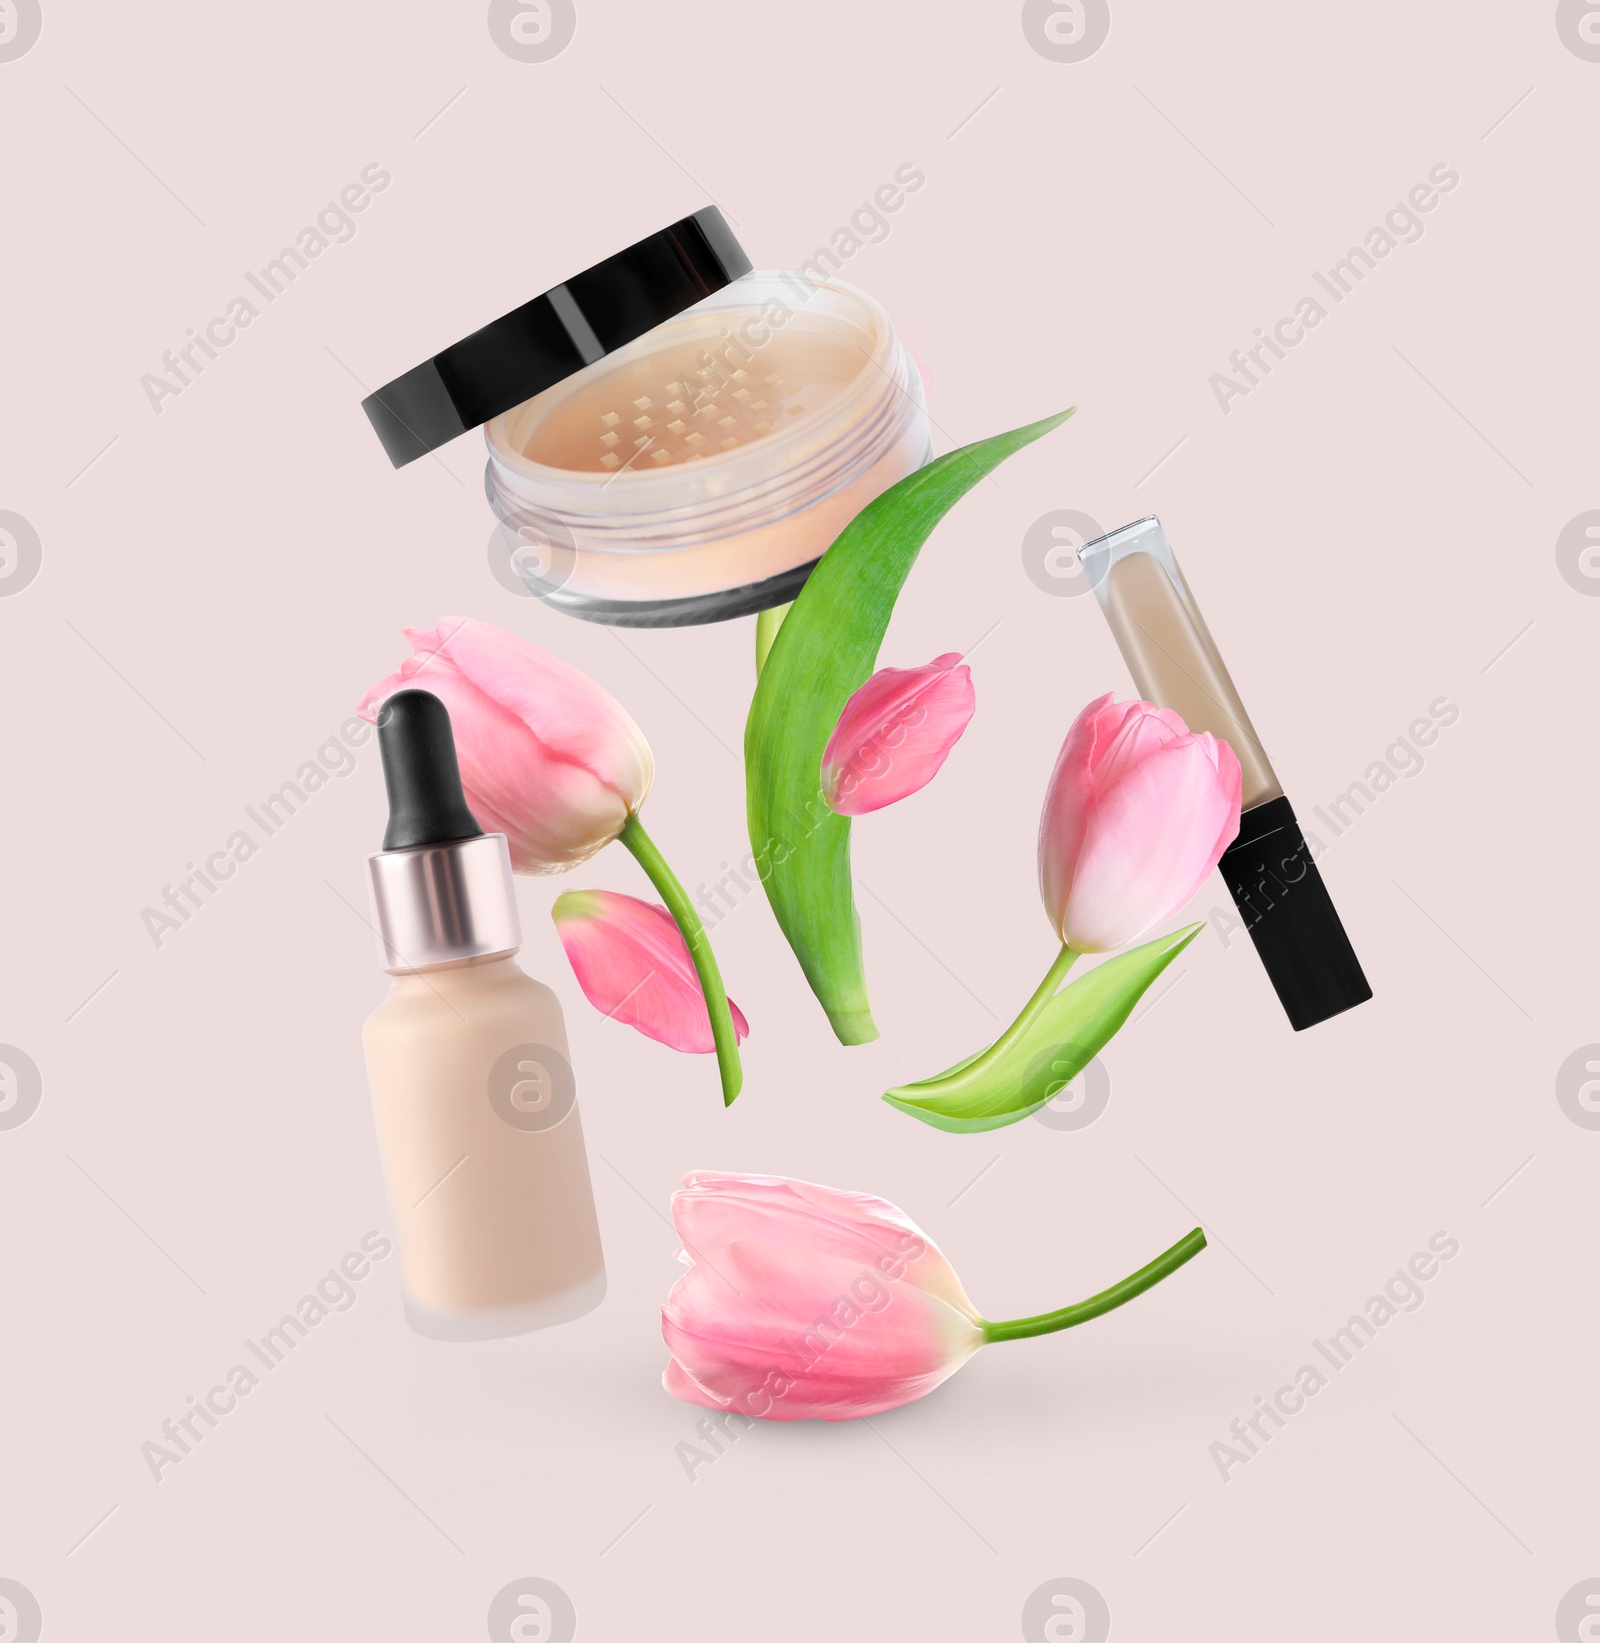 Image of Spring flowers and makeup products in air on beige background